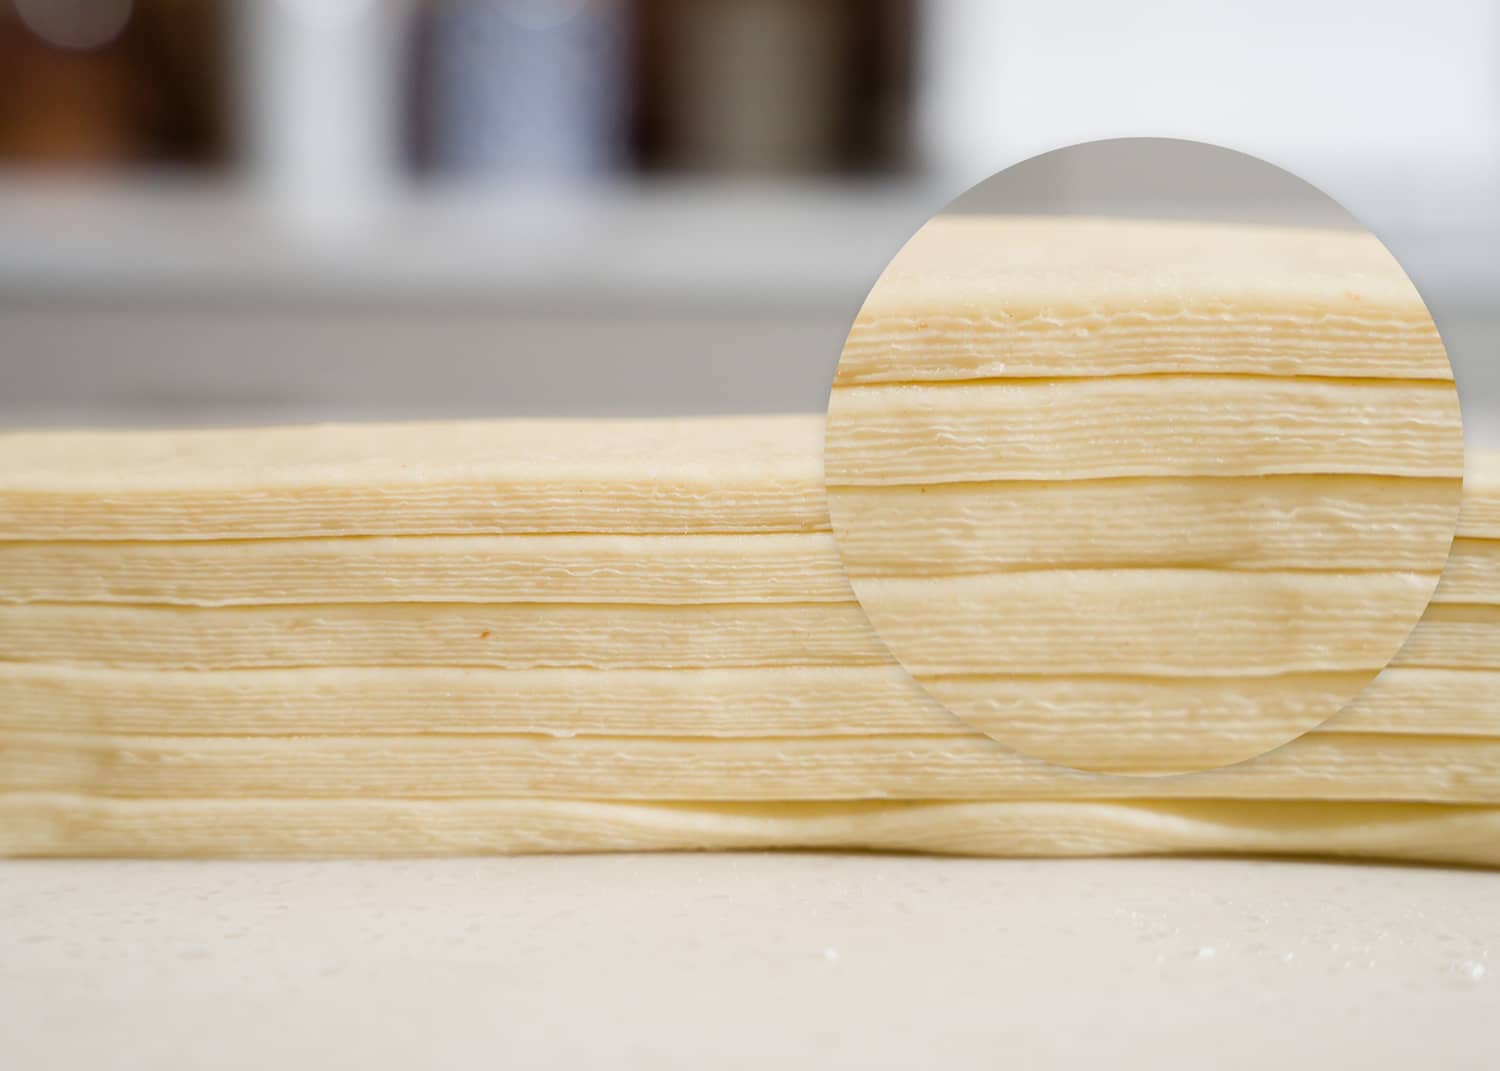 close-up shot of dough cross-section showing lamination